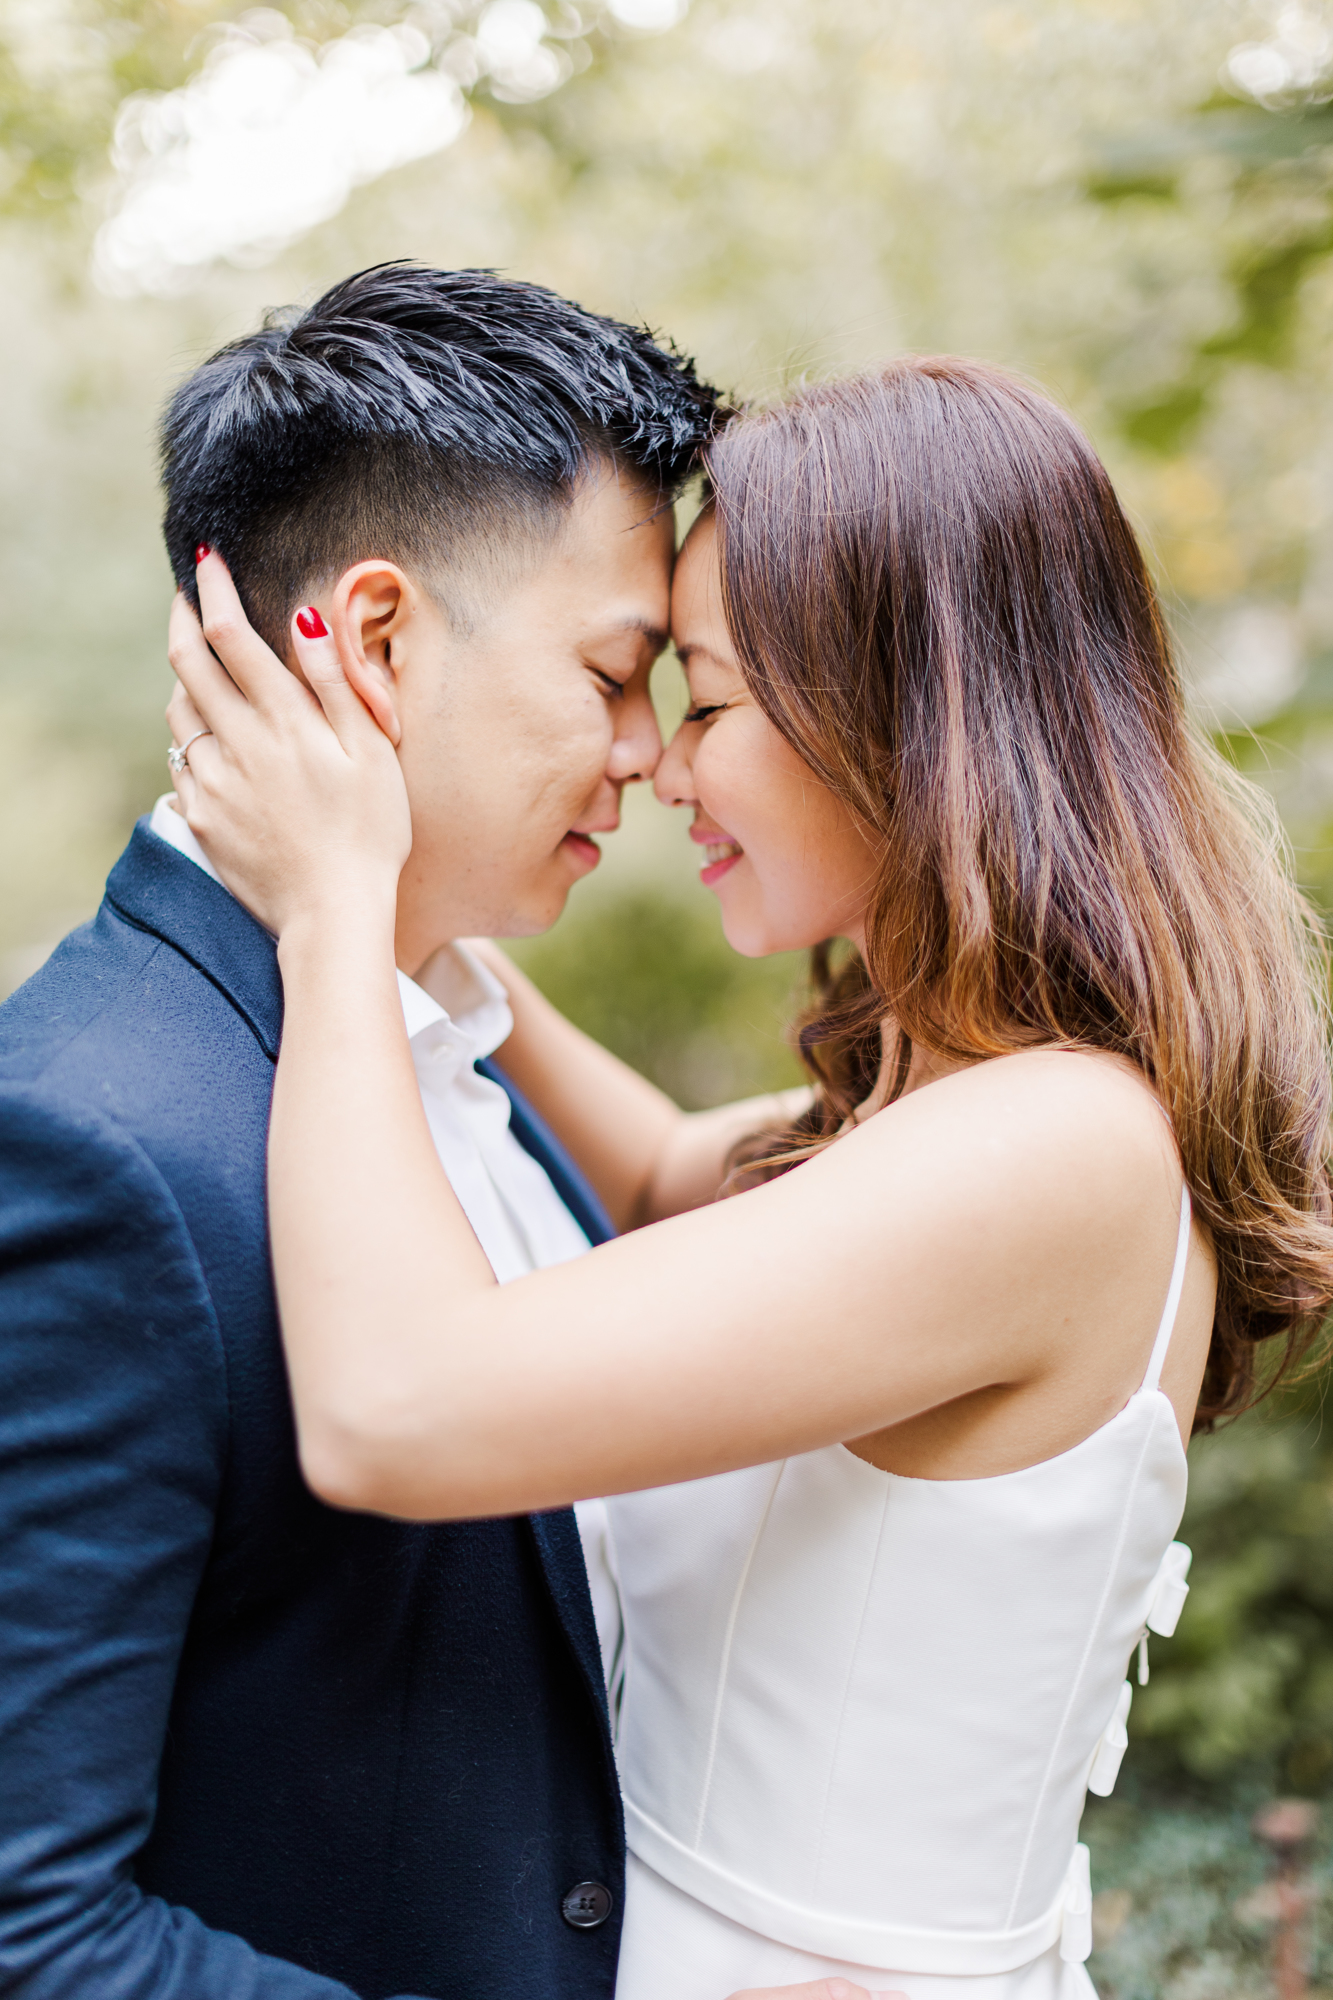 The Best Time of Year for Lovely DUMBO Engagement Photos